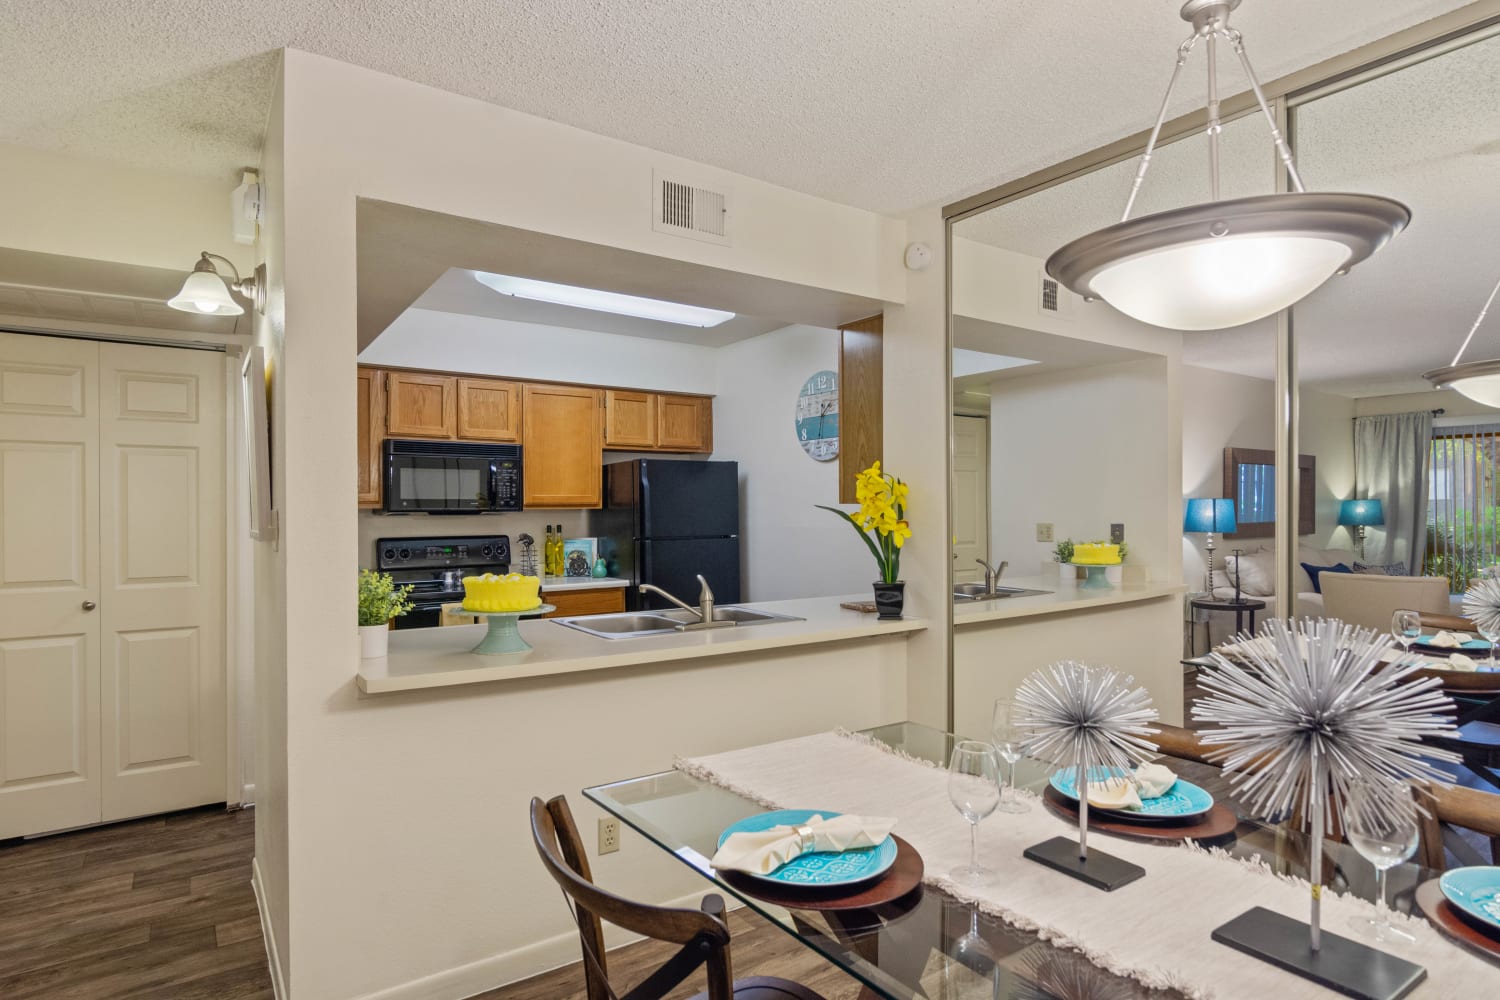 Waterford Place Apartments offer spacious open floor plans in Mesa, Arizona